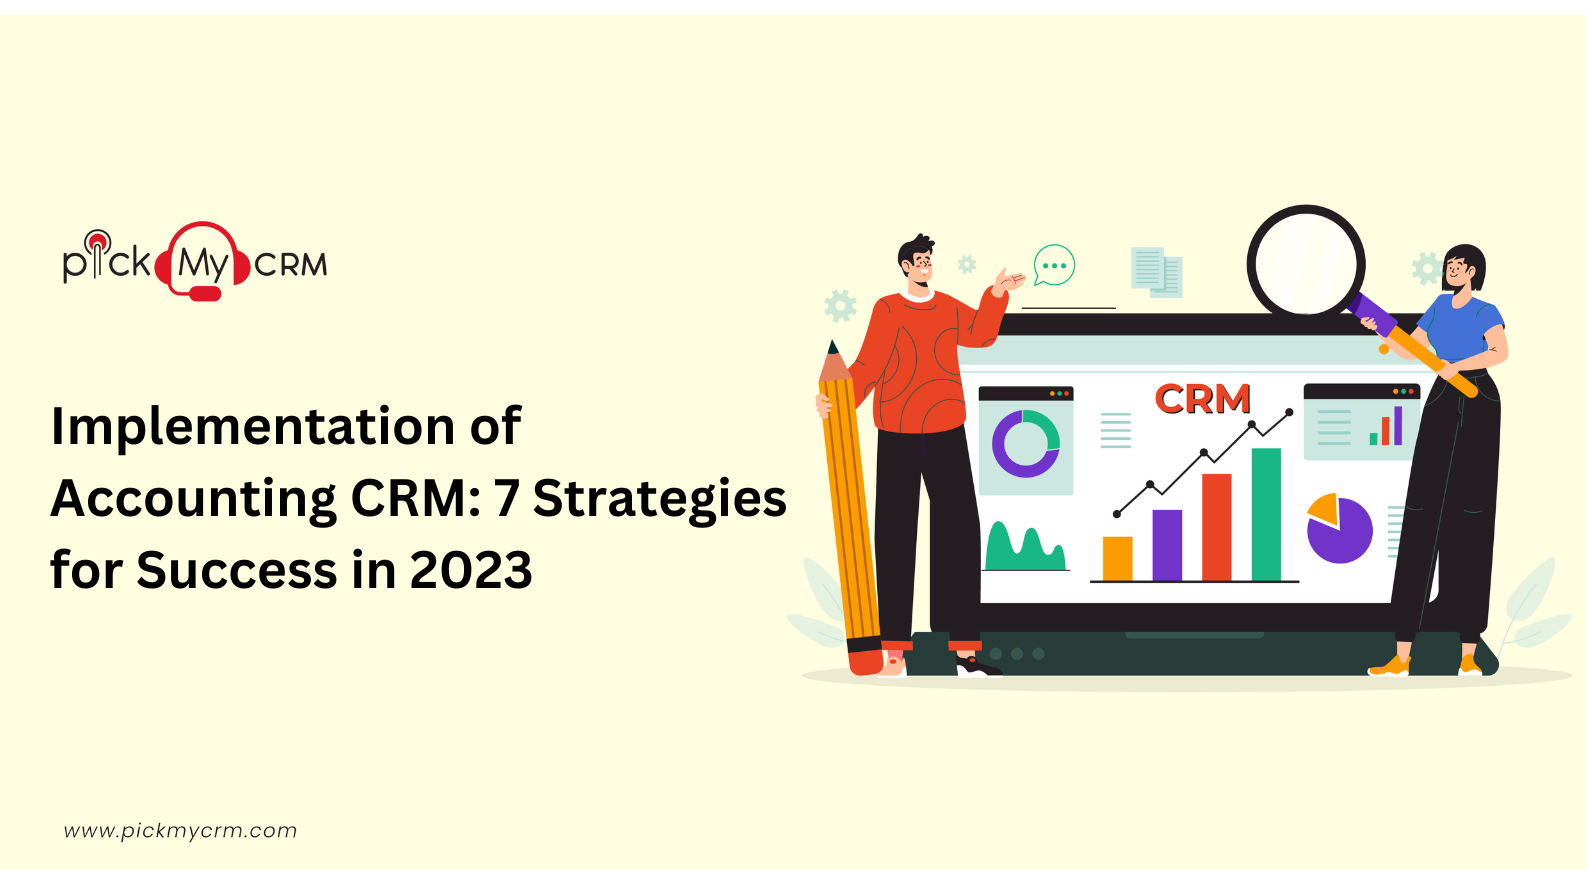 Implementation of Accounting CRM : 7 Strategies for success in 2023